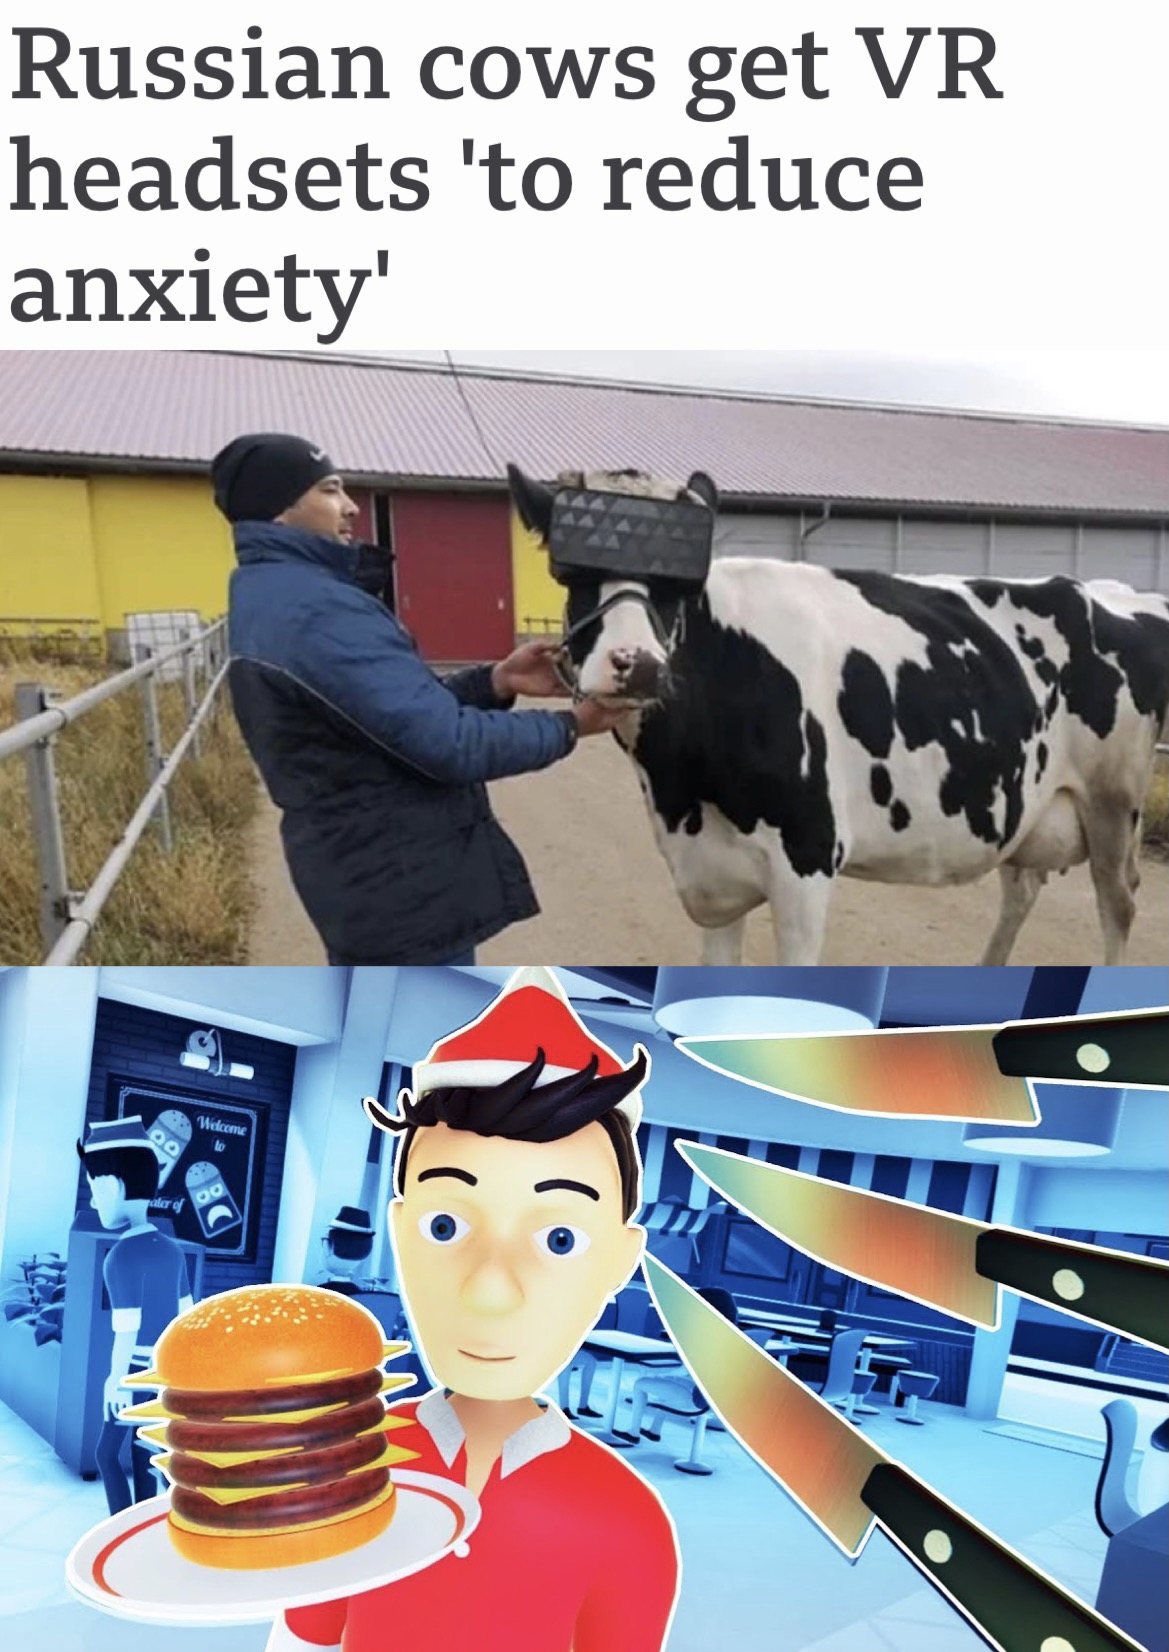 cow with vr goggles - Russian cows get Vr headsets 'to reduce anxiety' Q0 Welcome lo aler of Do